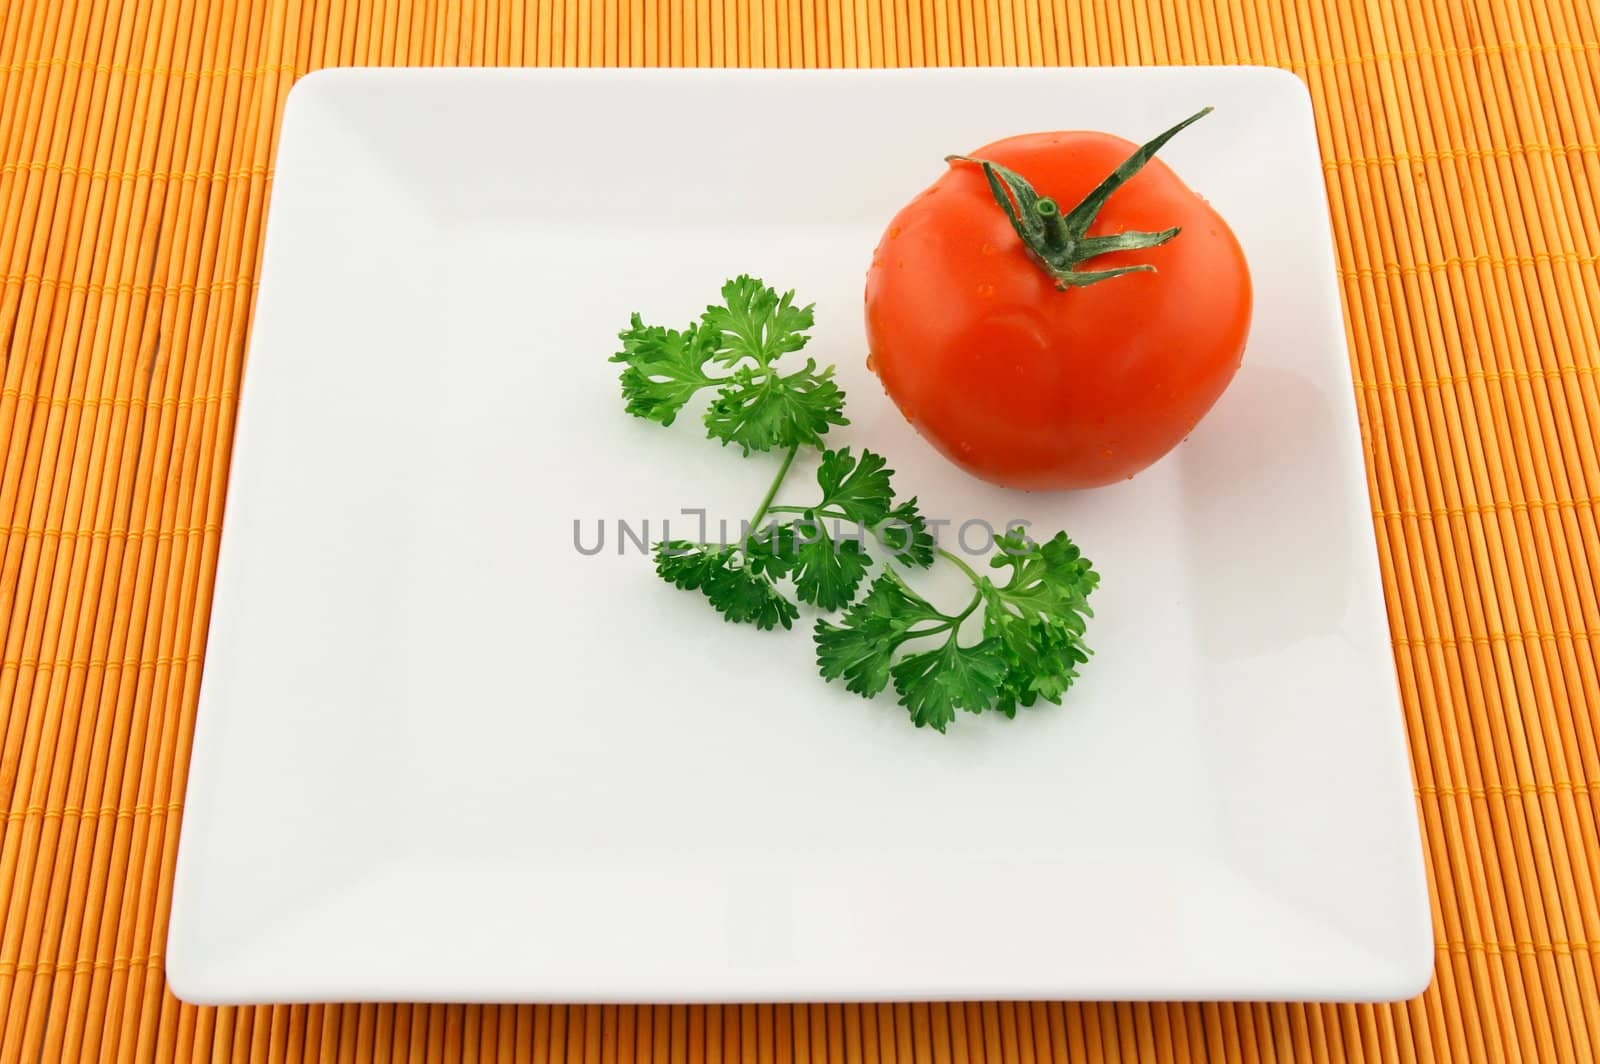 Tomato and parsley on a square plate by anikasalsera